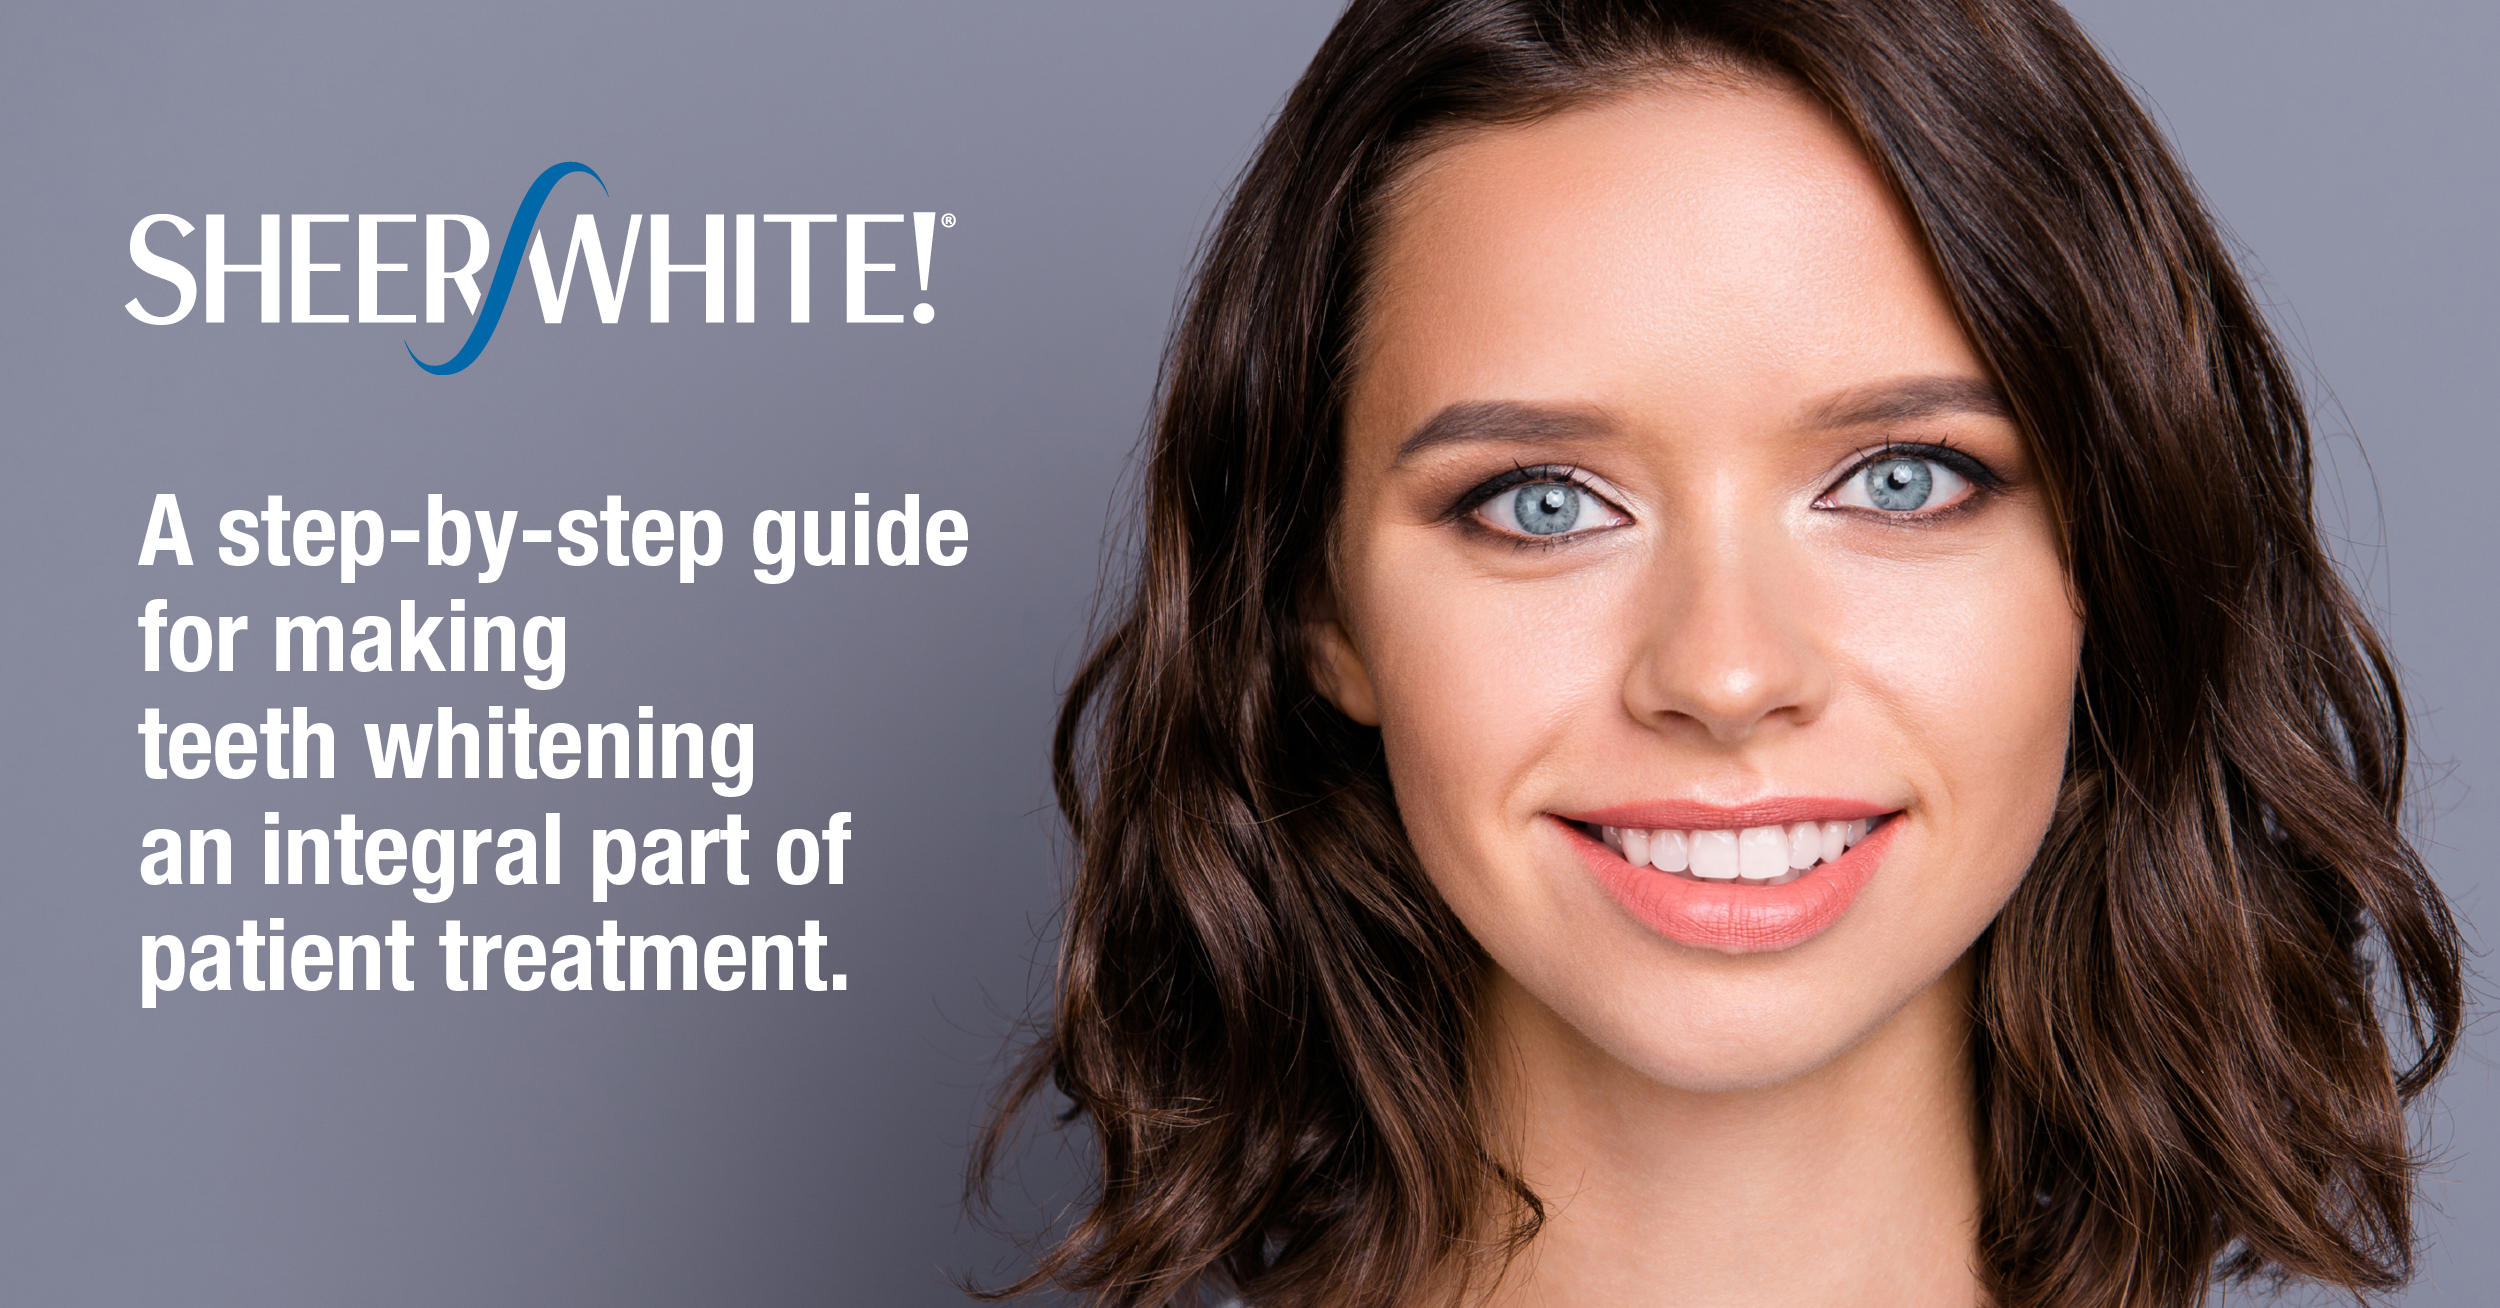 Improving Patient Care with Teeth Whitening